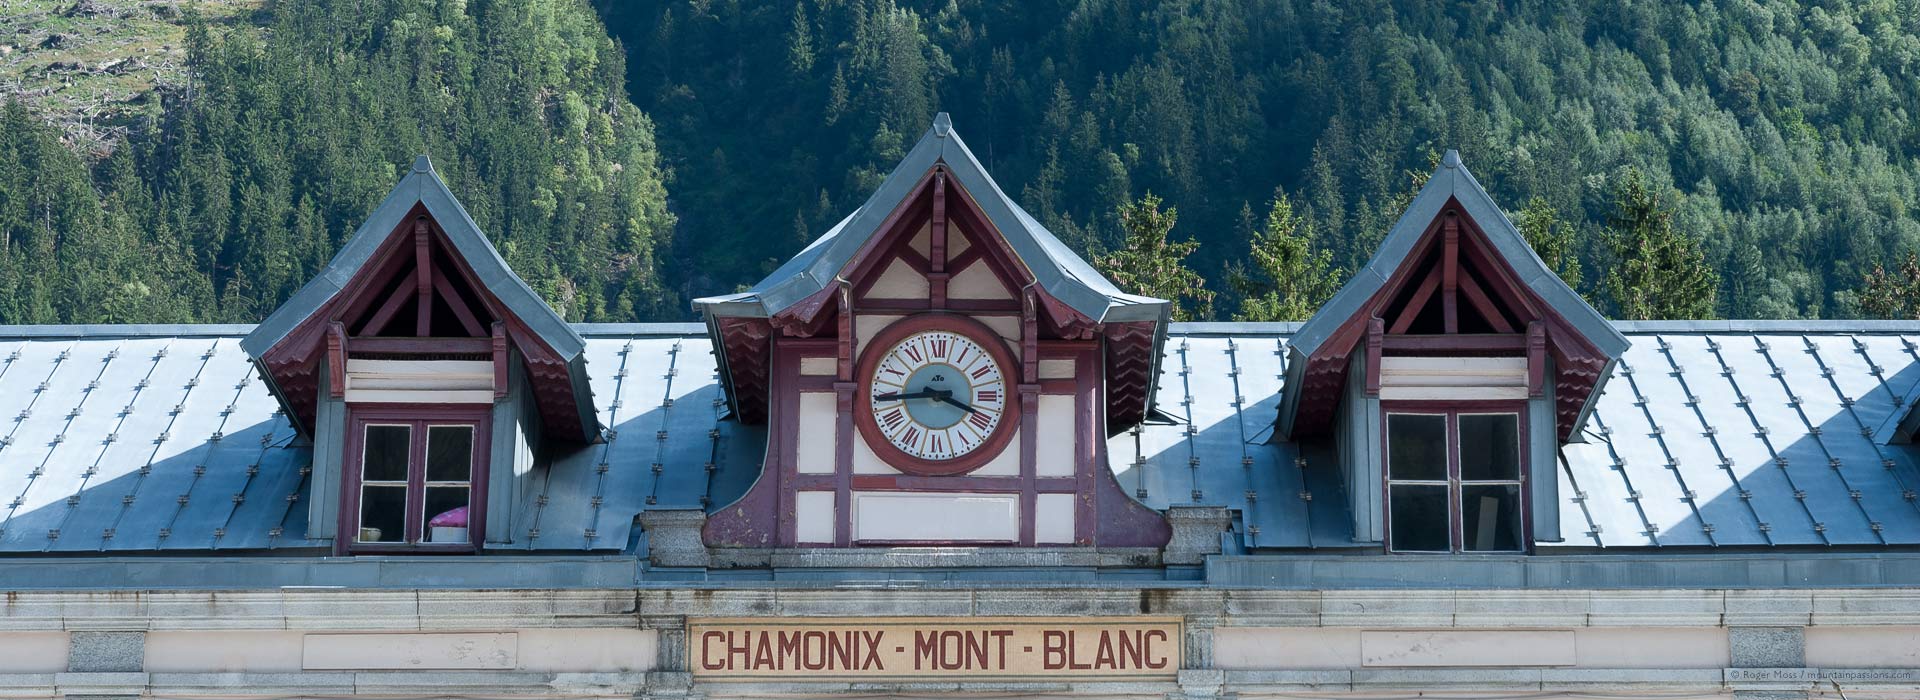 Roof of Chamonix Mont-Blanc Gare SNCF, French Alps, in summer.